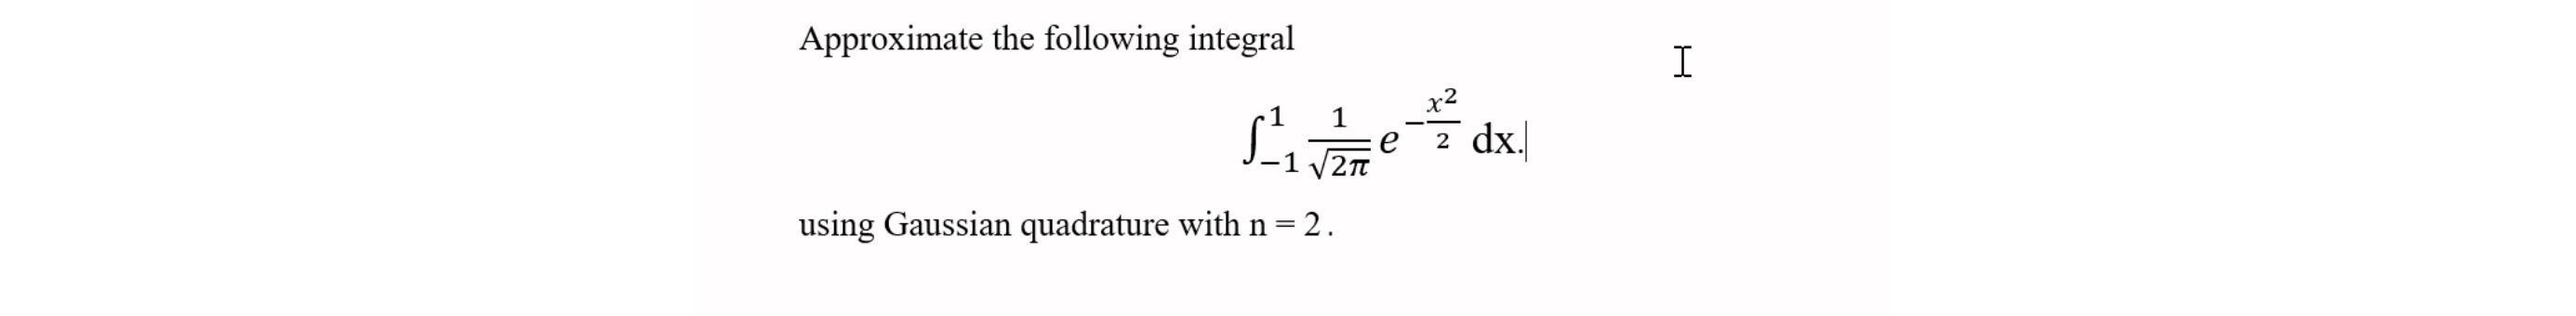 Approximate the following integral 51 1 -1 2 using Gaussian quadrature with n = 2. x2 2 dx. H